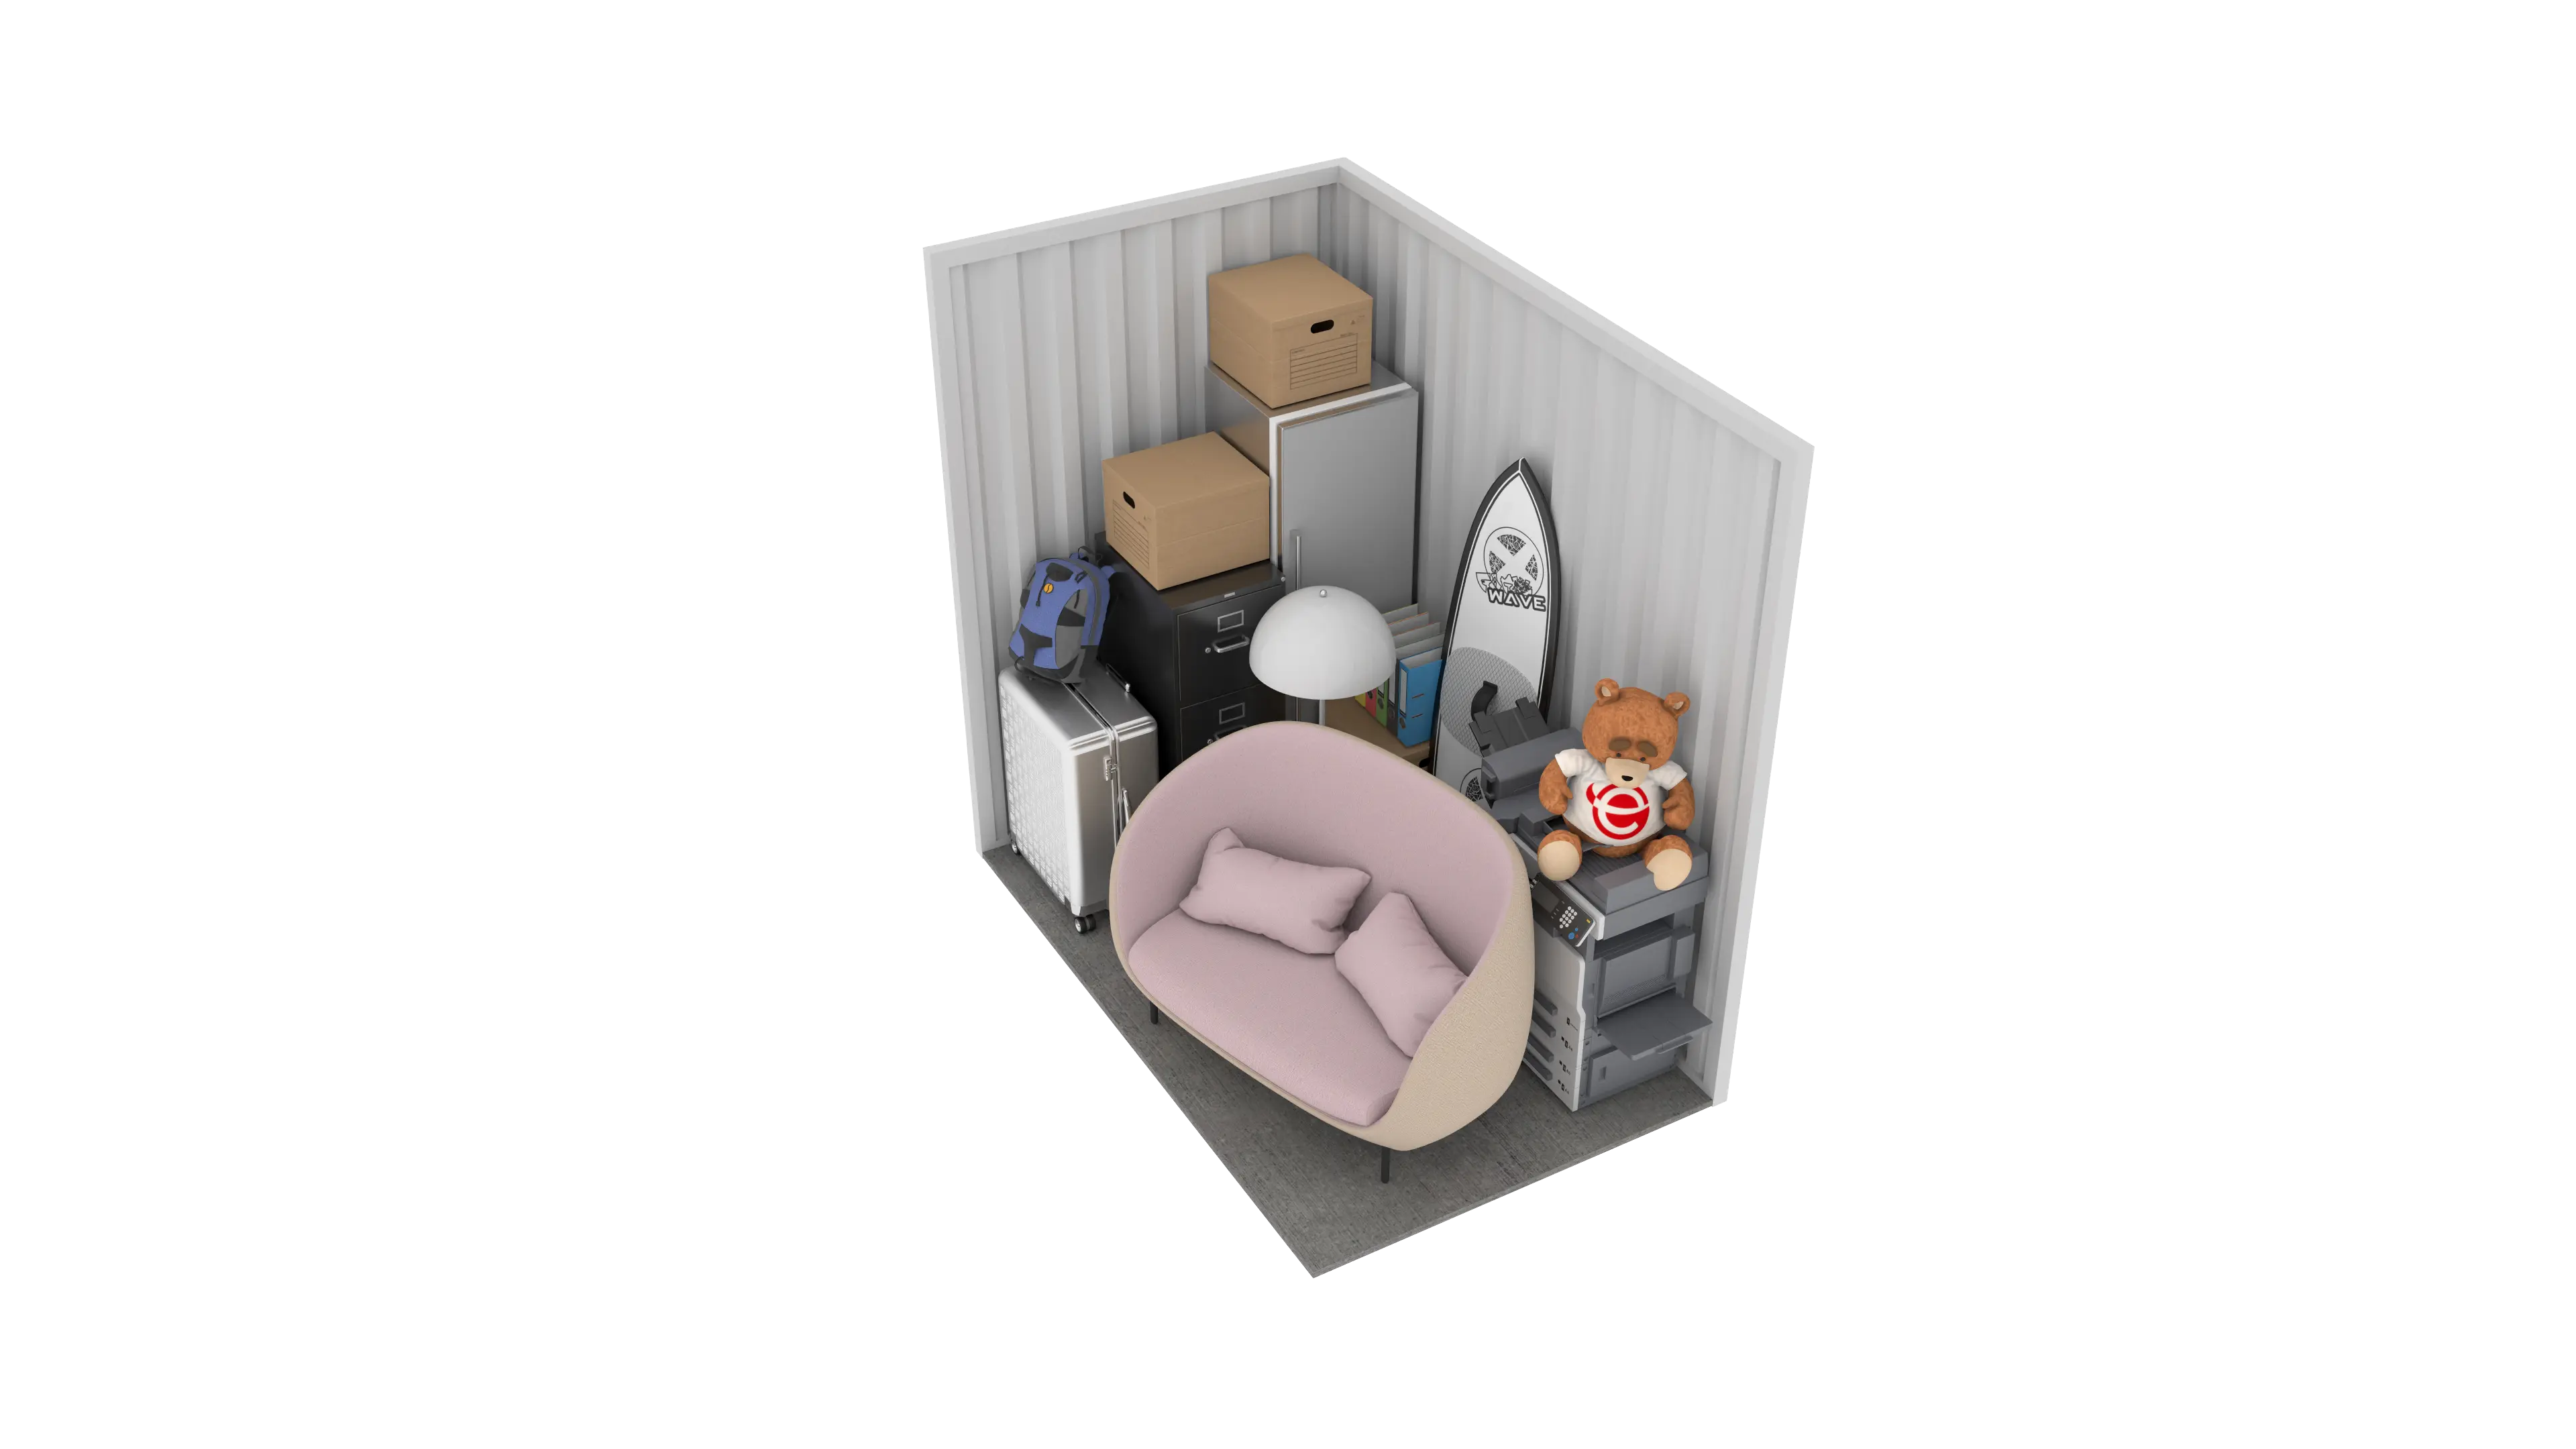 Isometric still of a storage unit with a size of 40 sqft